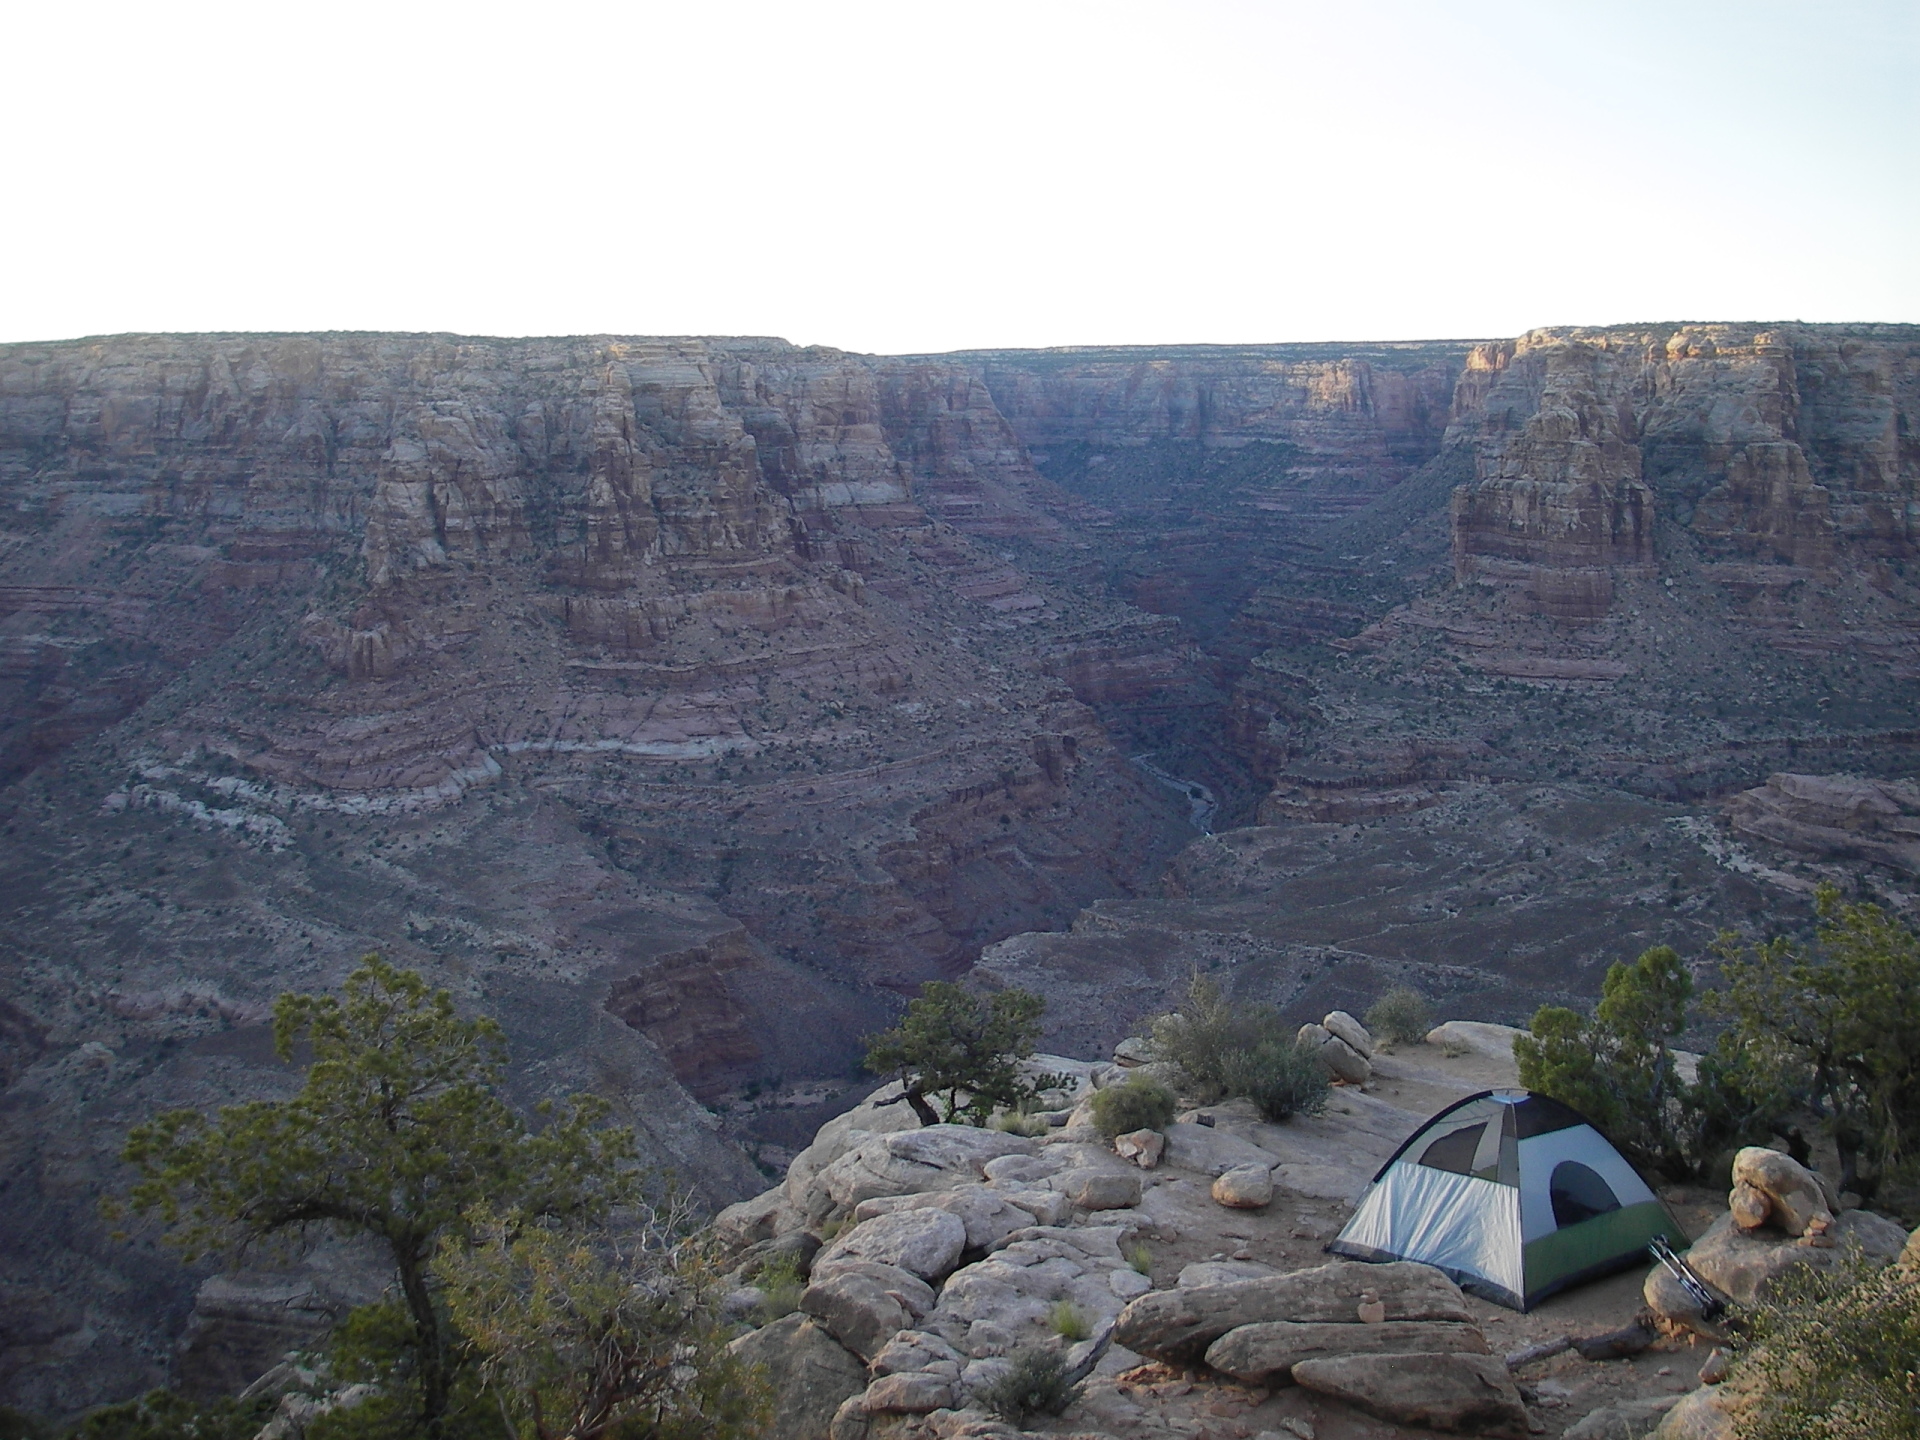 Tent camping at the Dark Canyon in the Grand Canyon